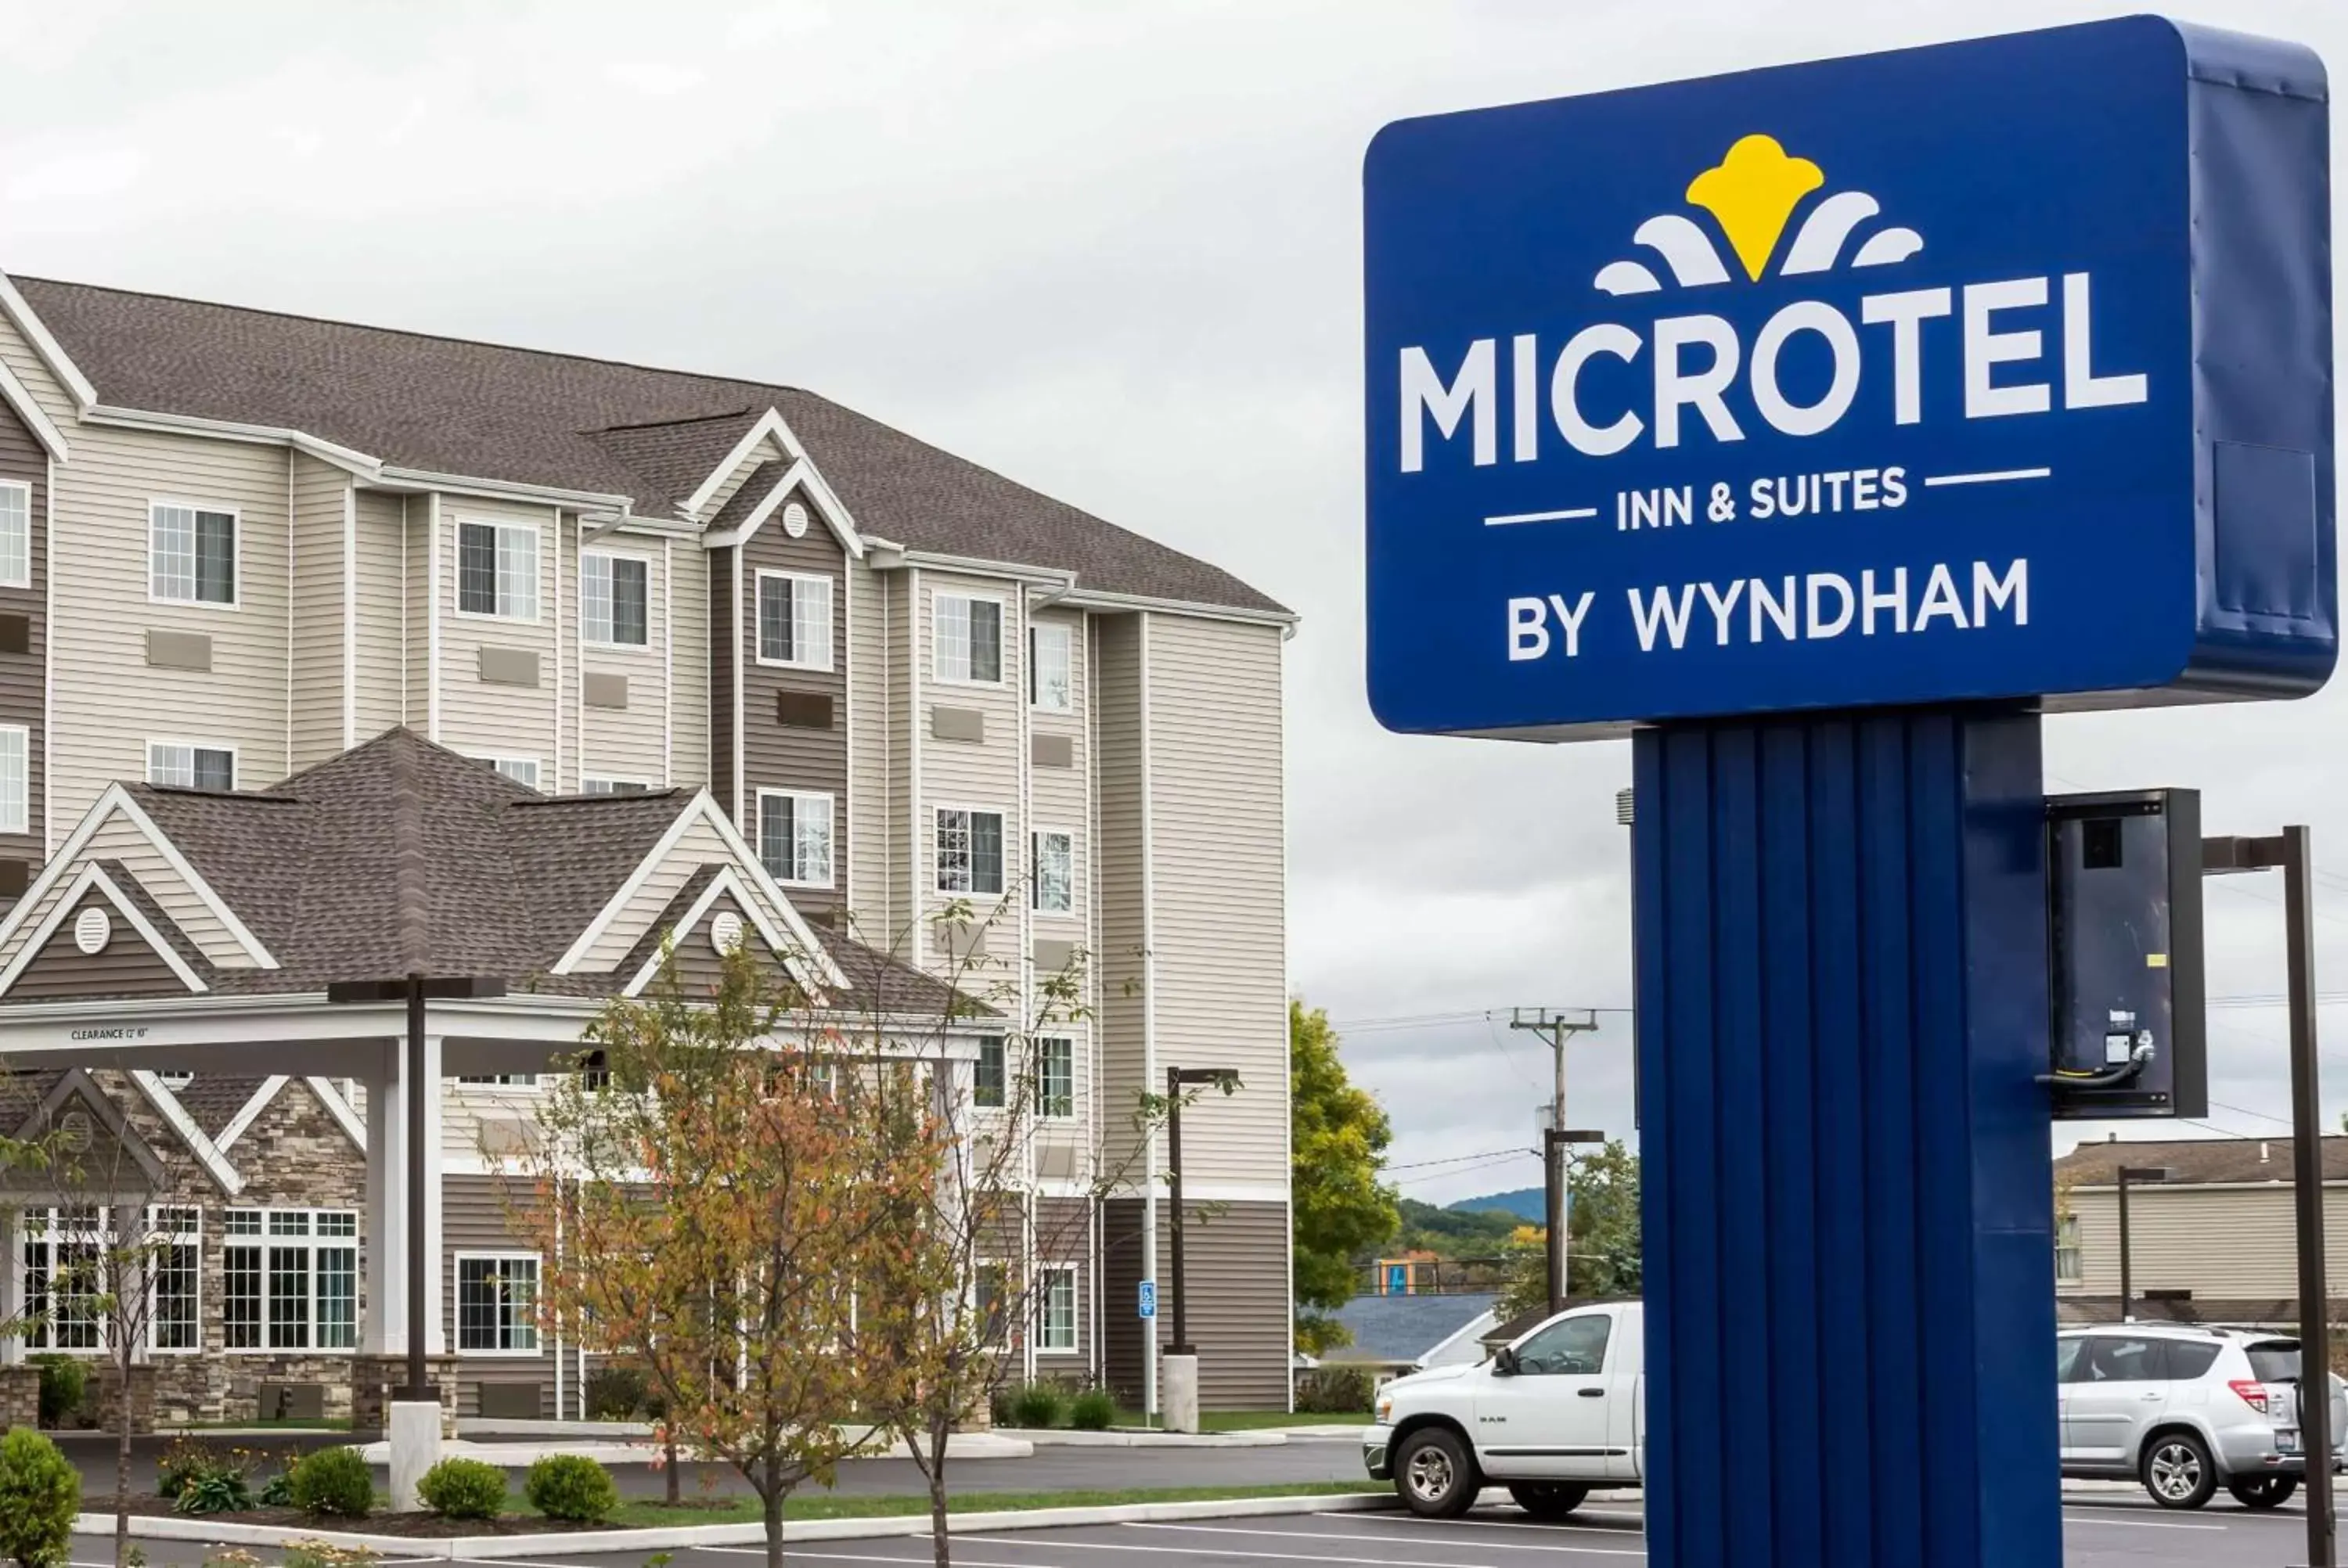 Property building in Microtel Inn & Suites by Wyndham Altoona